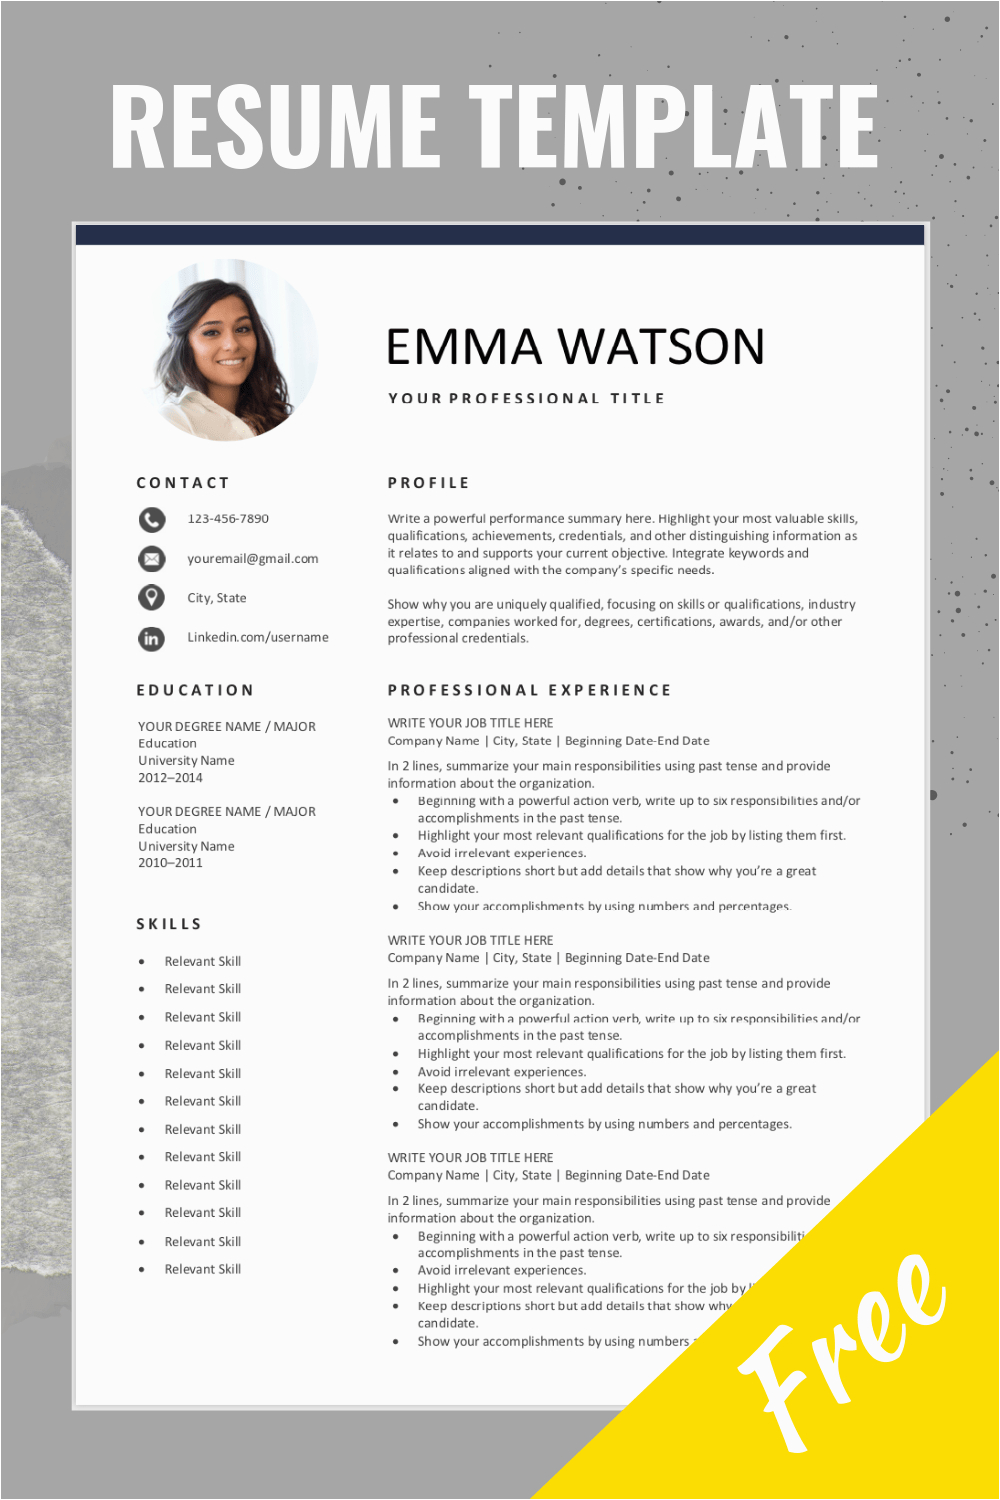 resume template free editable layout of are you looking for a free editable resume template sign up for our job search tips and this template for free you can easily adjust it in microsoft word resume